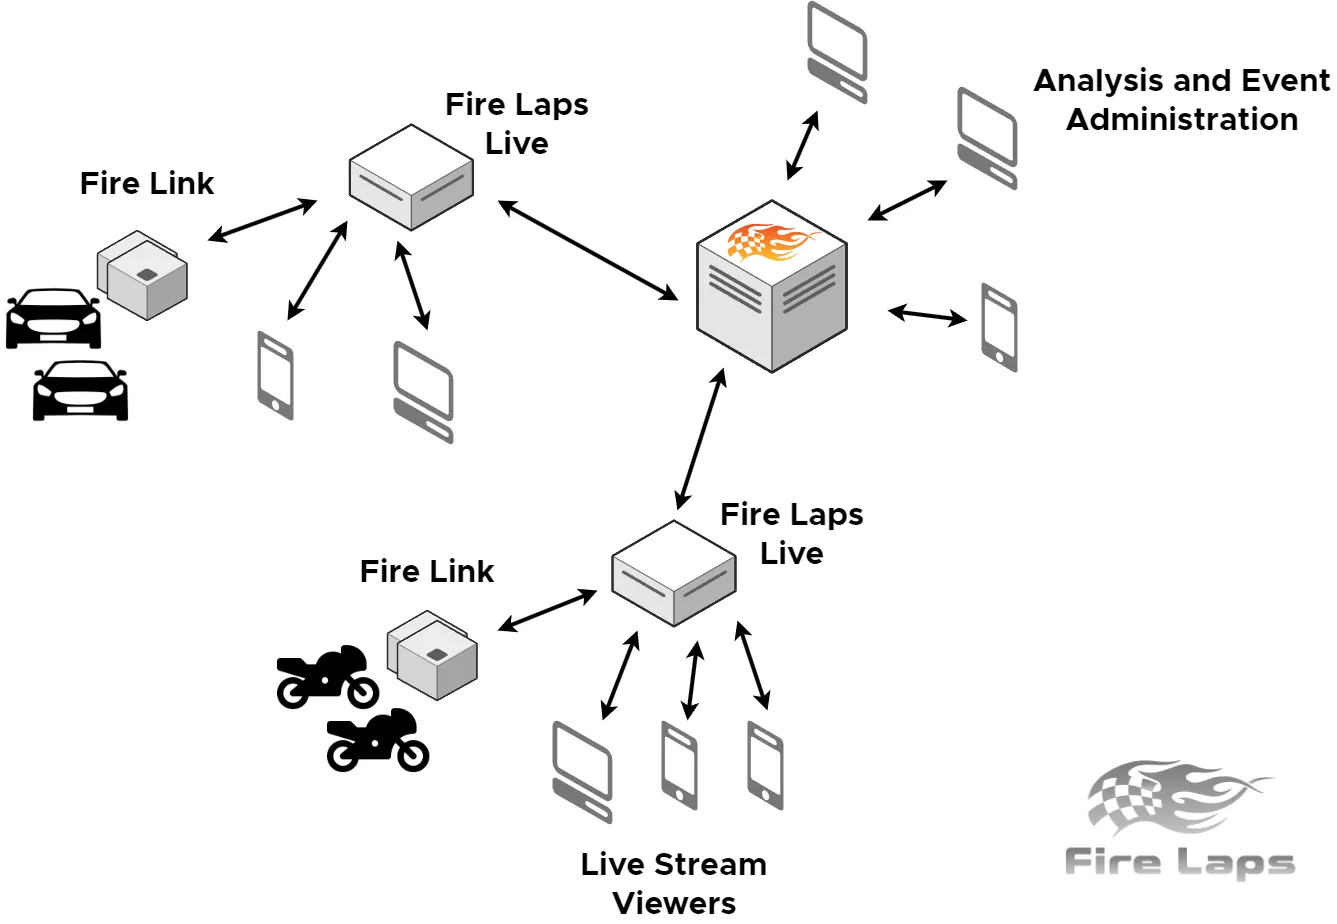 Fire Laps Live system